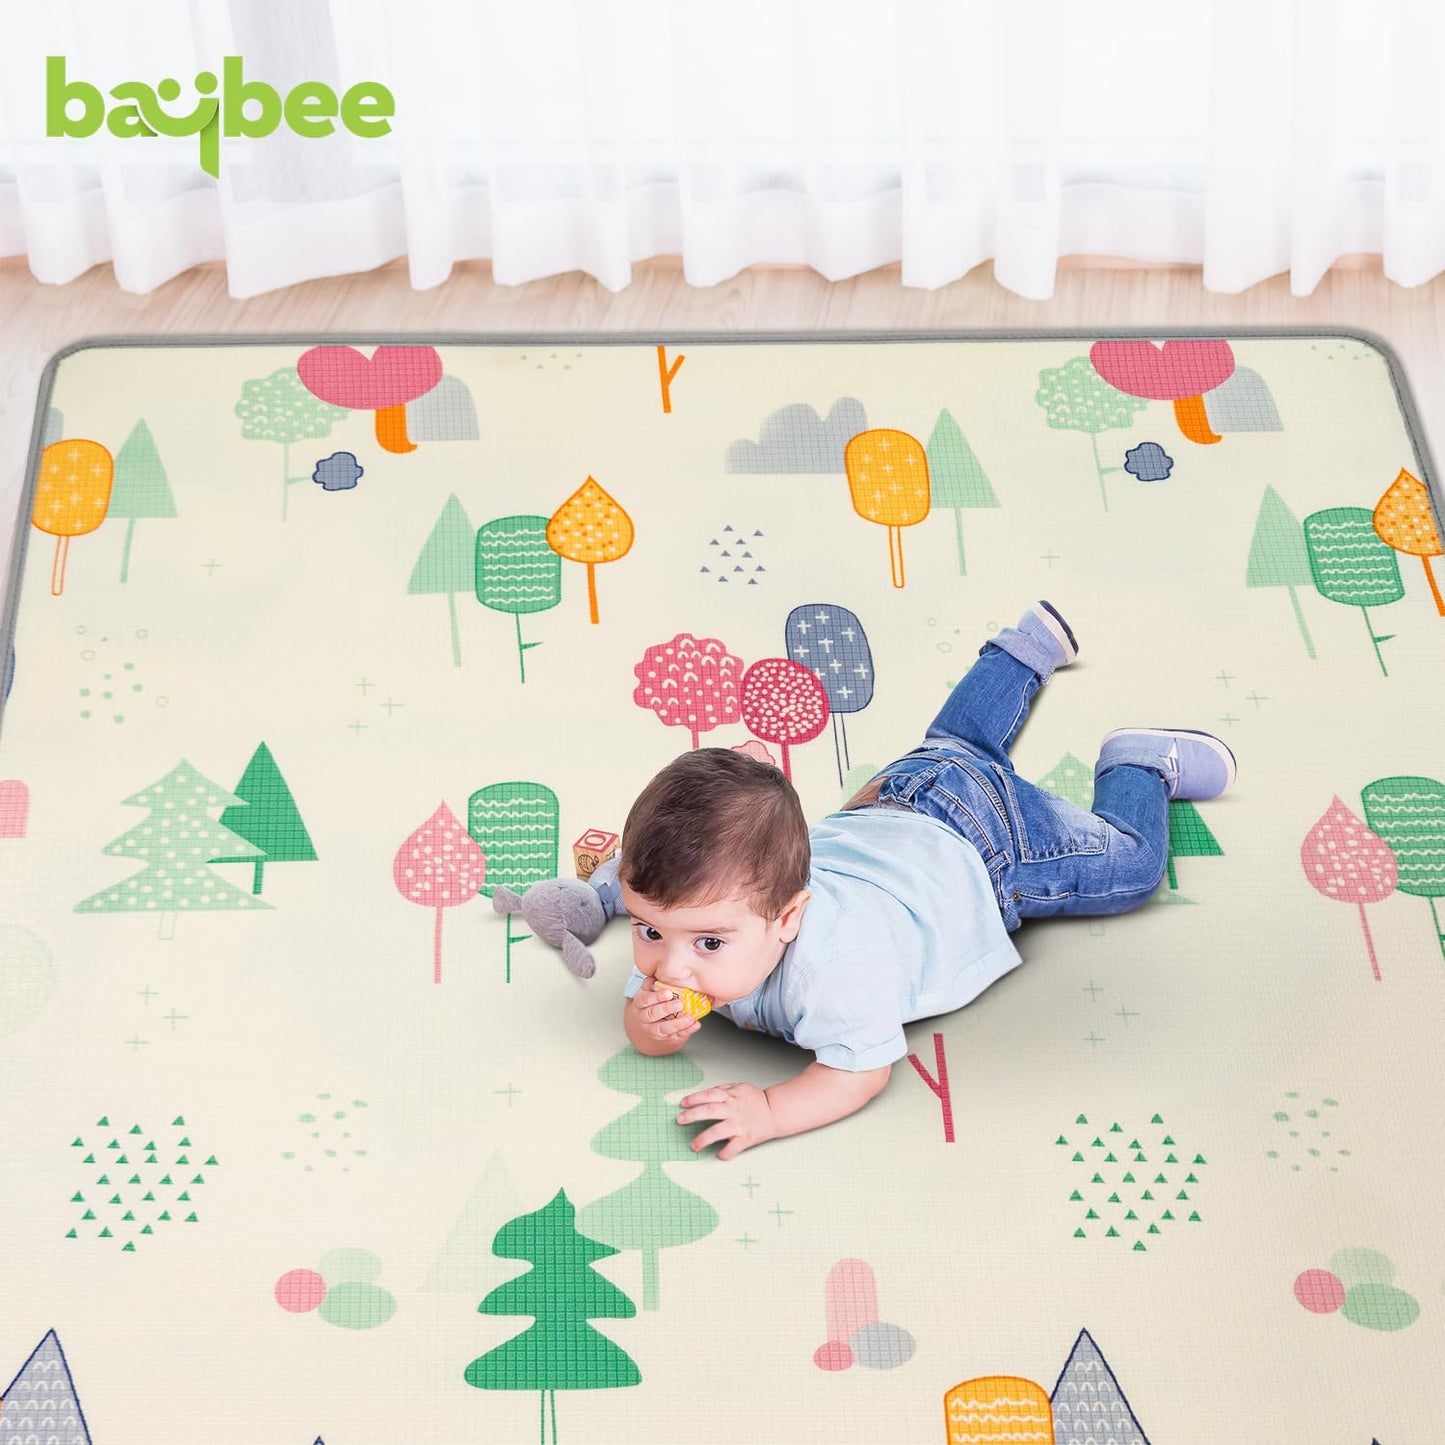 Cartoon Theme Baby Double Sided Play Mat Foldable Crawling Mat Size W-180cm X H-150 cm -  Assorted Themes